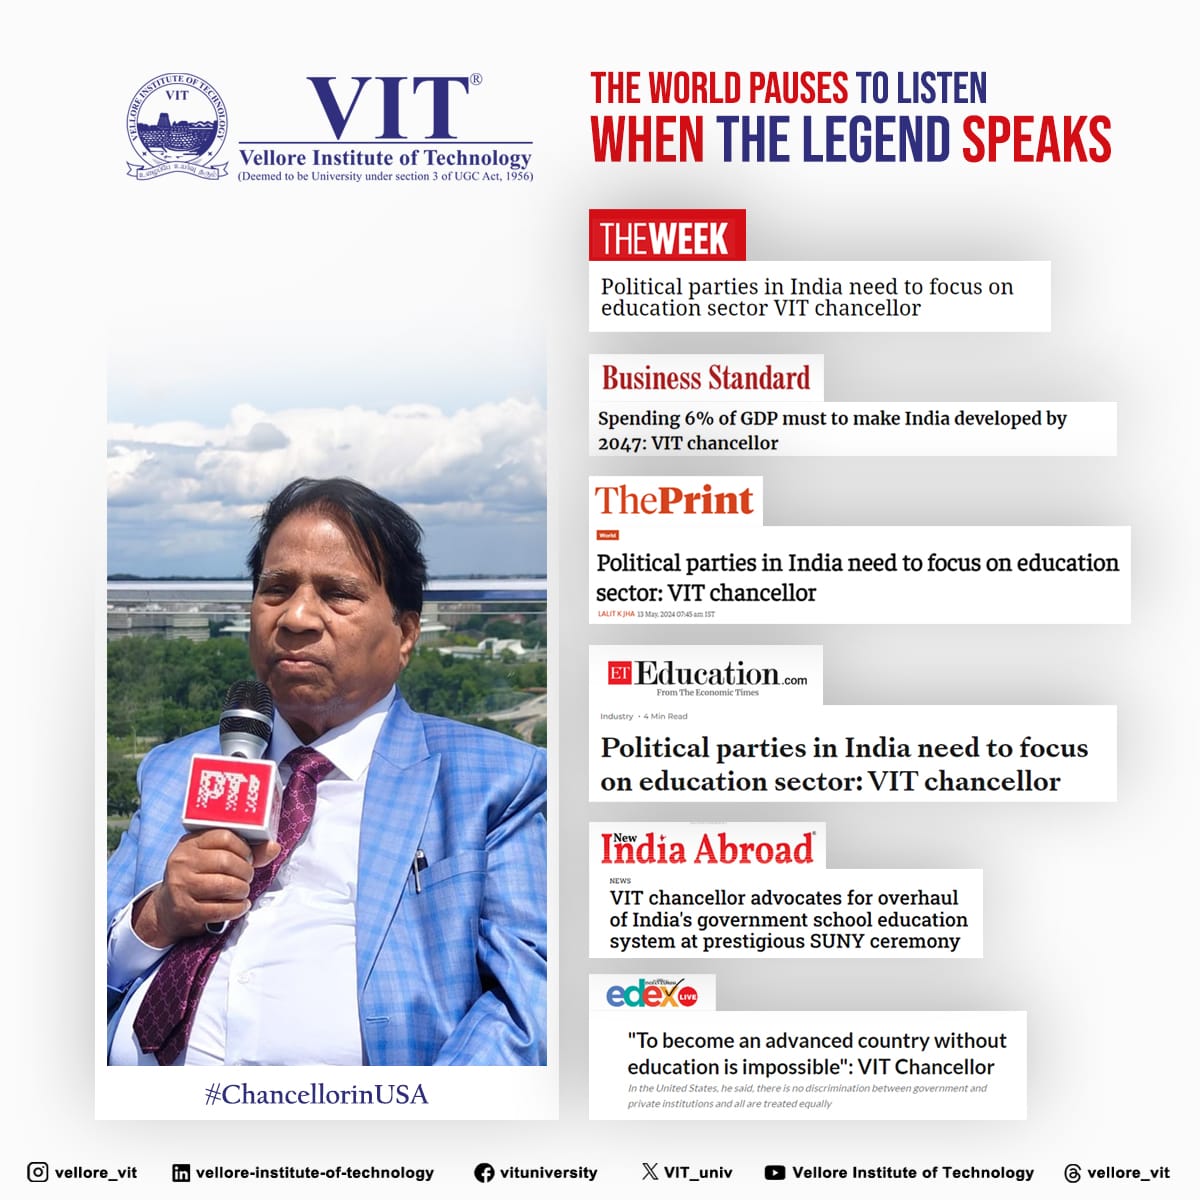 Take a quick look at our Chancellor's interviews to the Press Trust of India(PTI) @ USA. A moment where the globe awaits to hear him!

#VIT #PTI #PressTrustOfIndia #THEWeek #BusinessStandard #ThePrint #TheEconomicTimes #ET #Education #NewIndiaAbroad #ChancellorInUSA